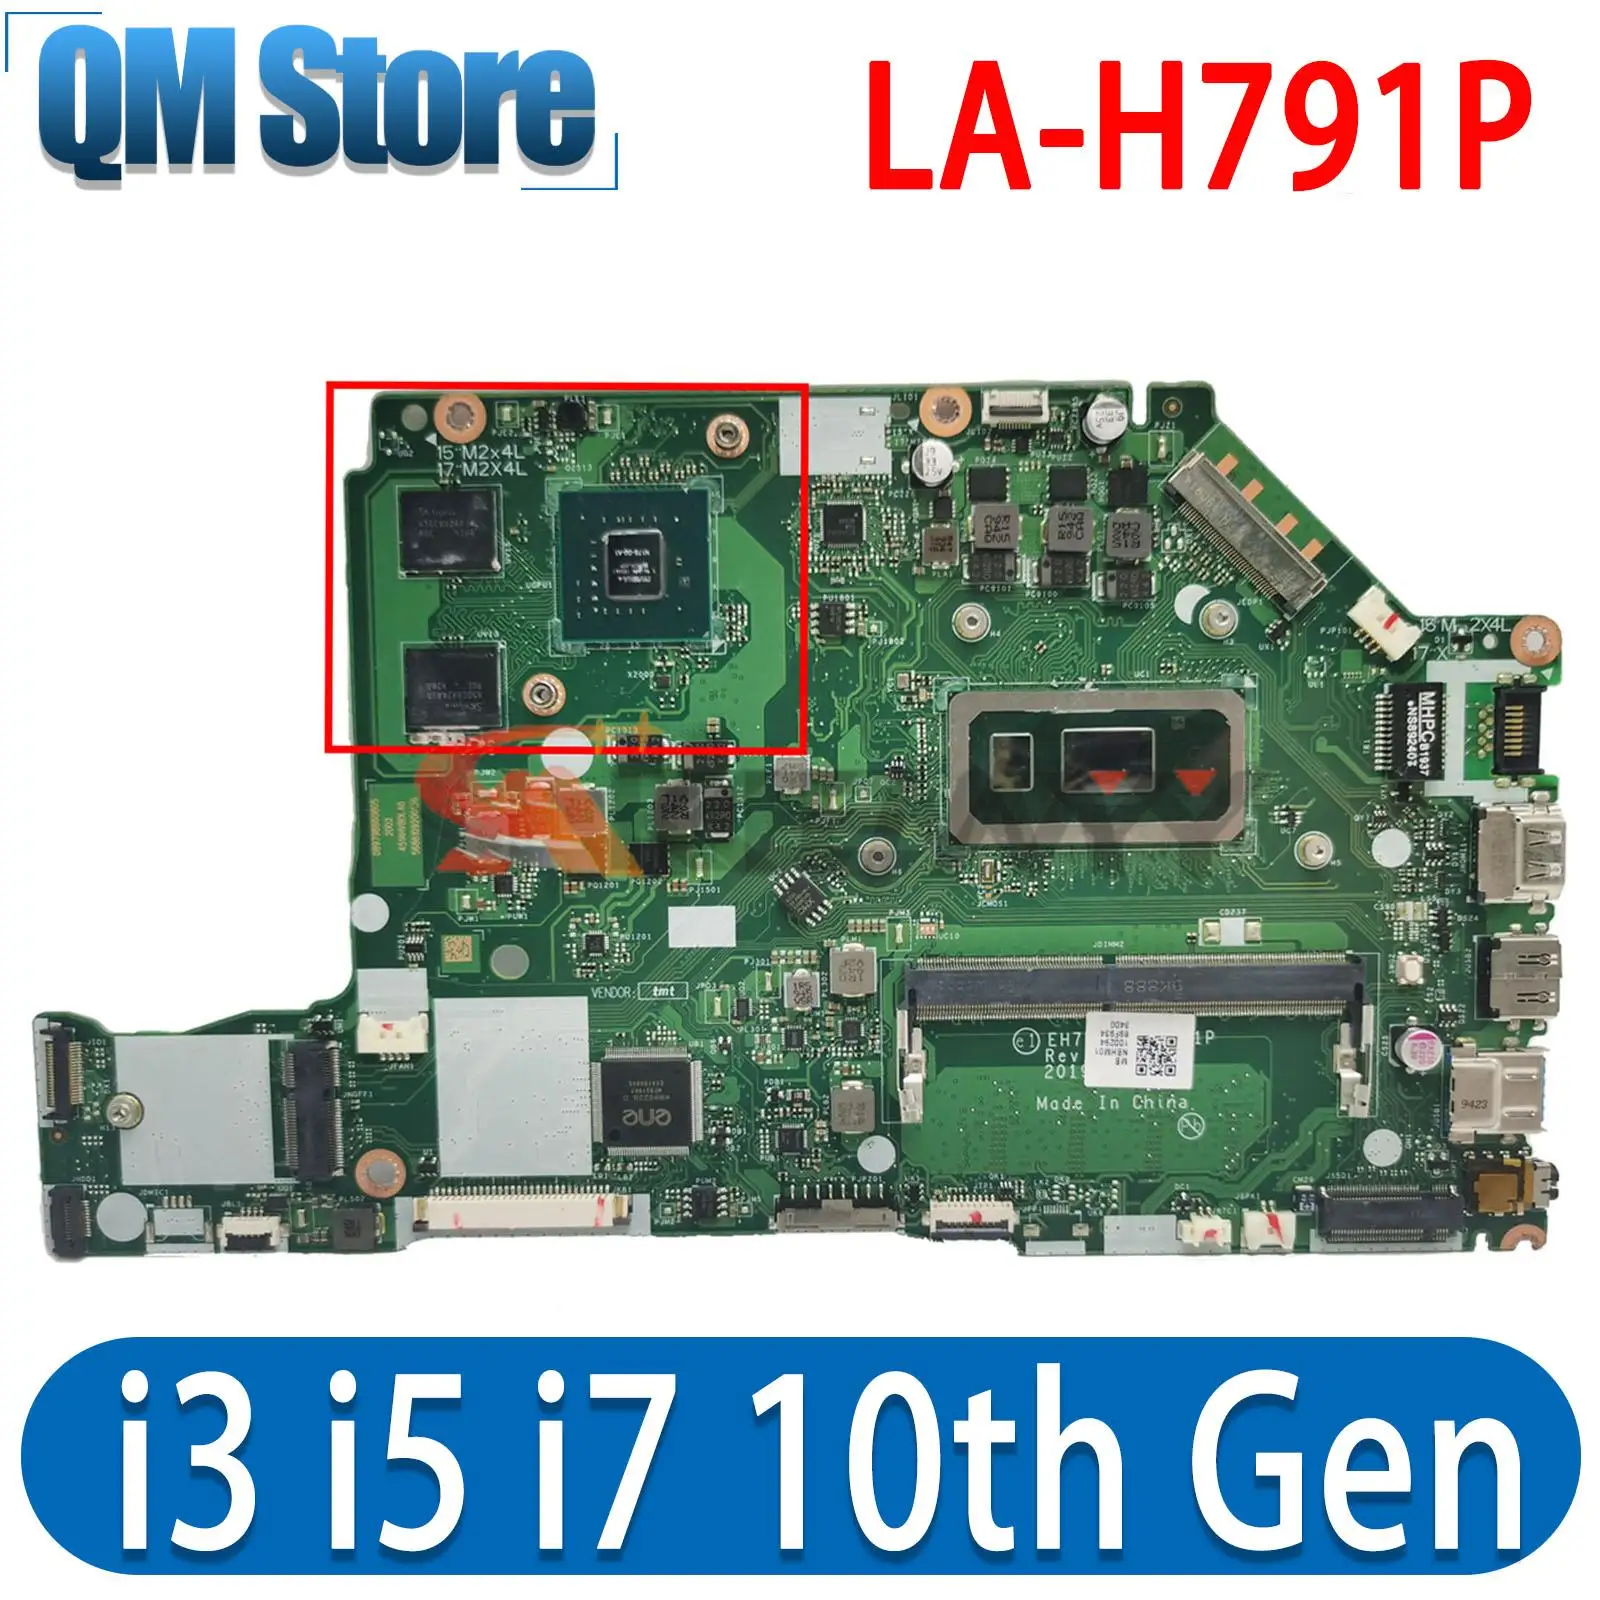 

Notebook Mainboard For Acer Aspire A317-51G EX215-51G Laptop Motherboard LA-H791P I5 I7 CPU GPU MX350 4GB RAM 100% Tested Work